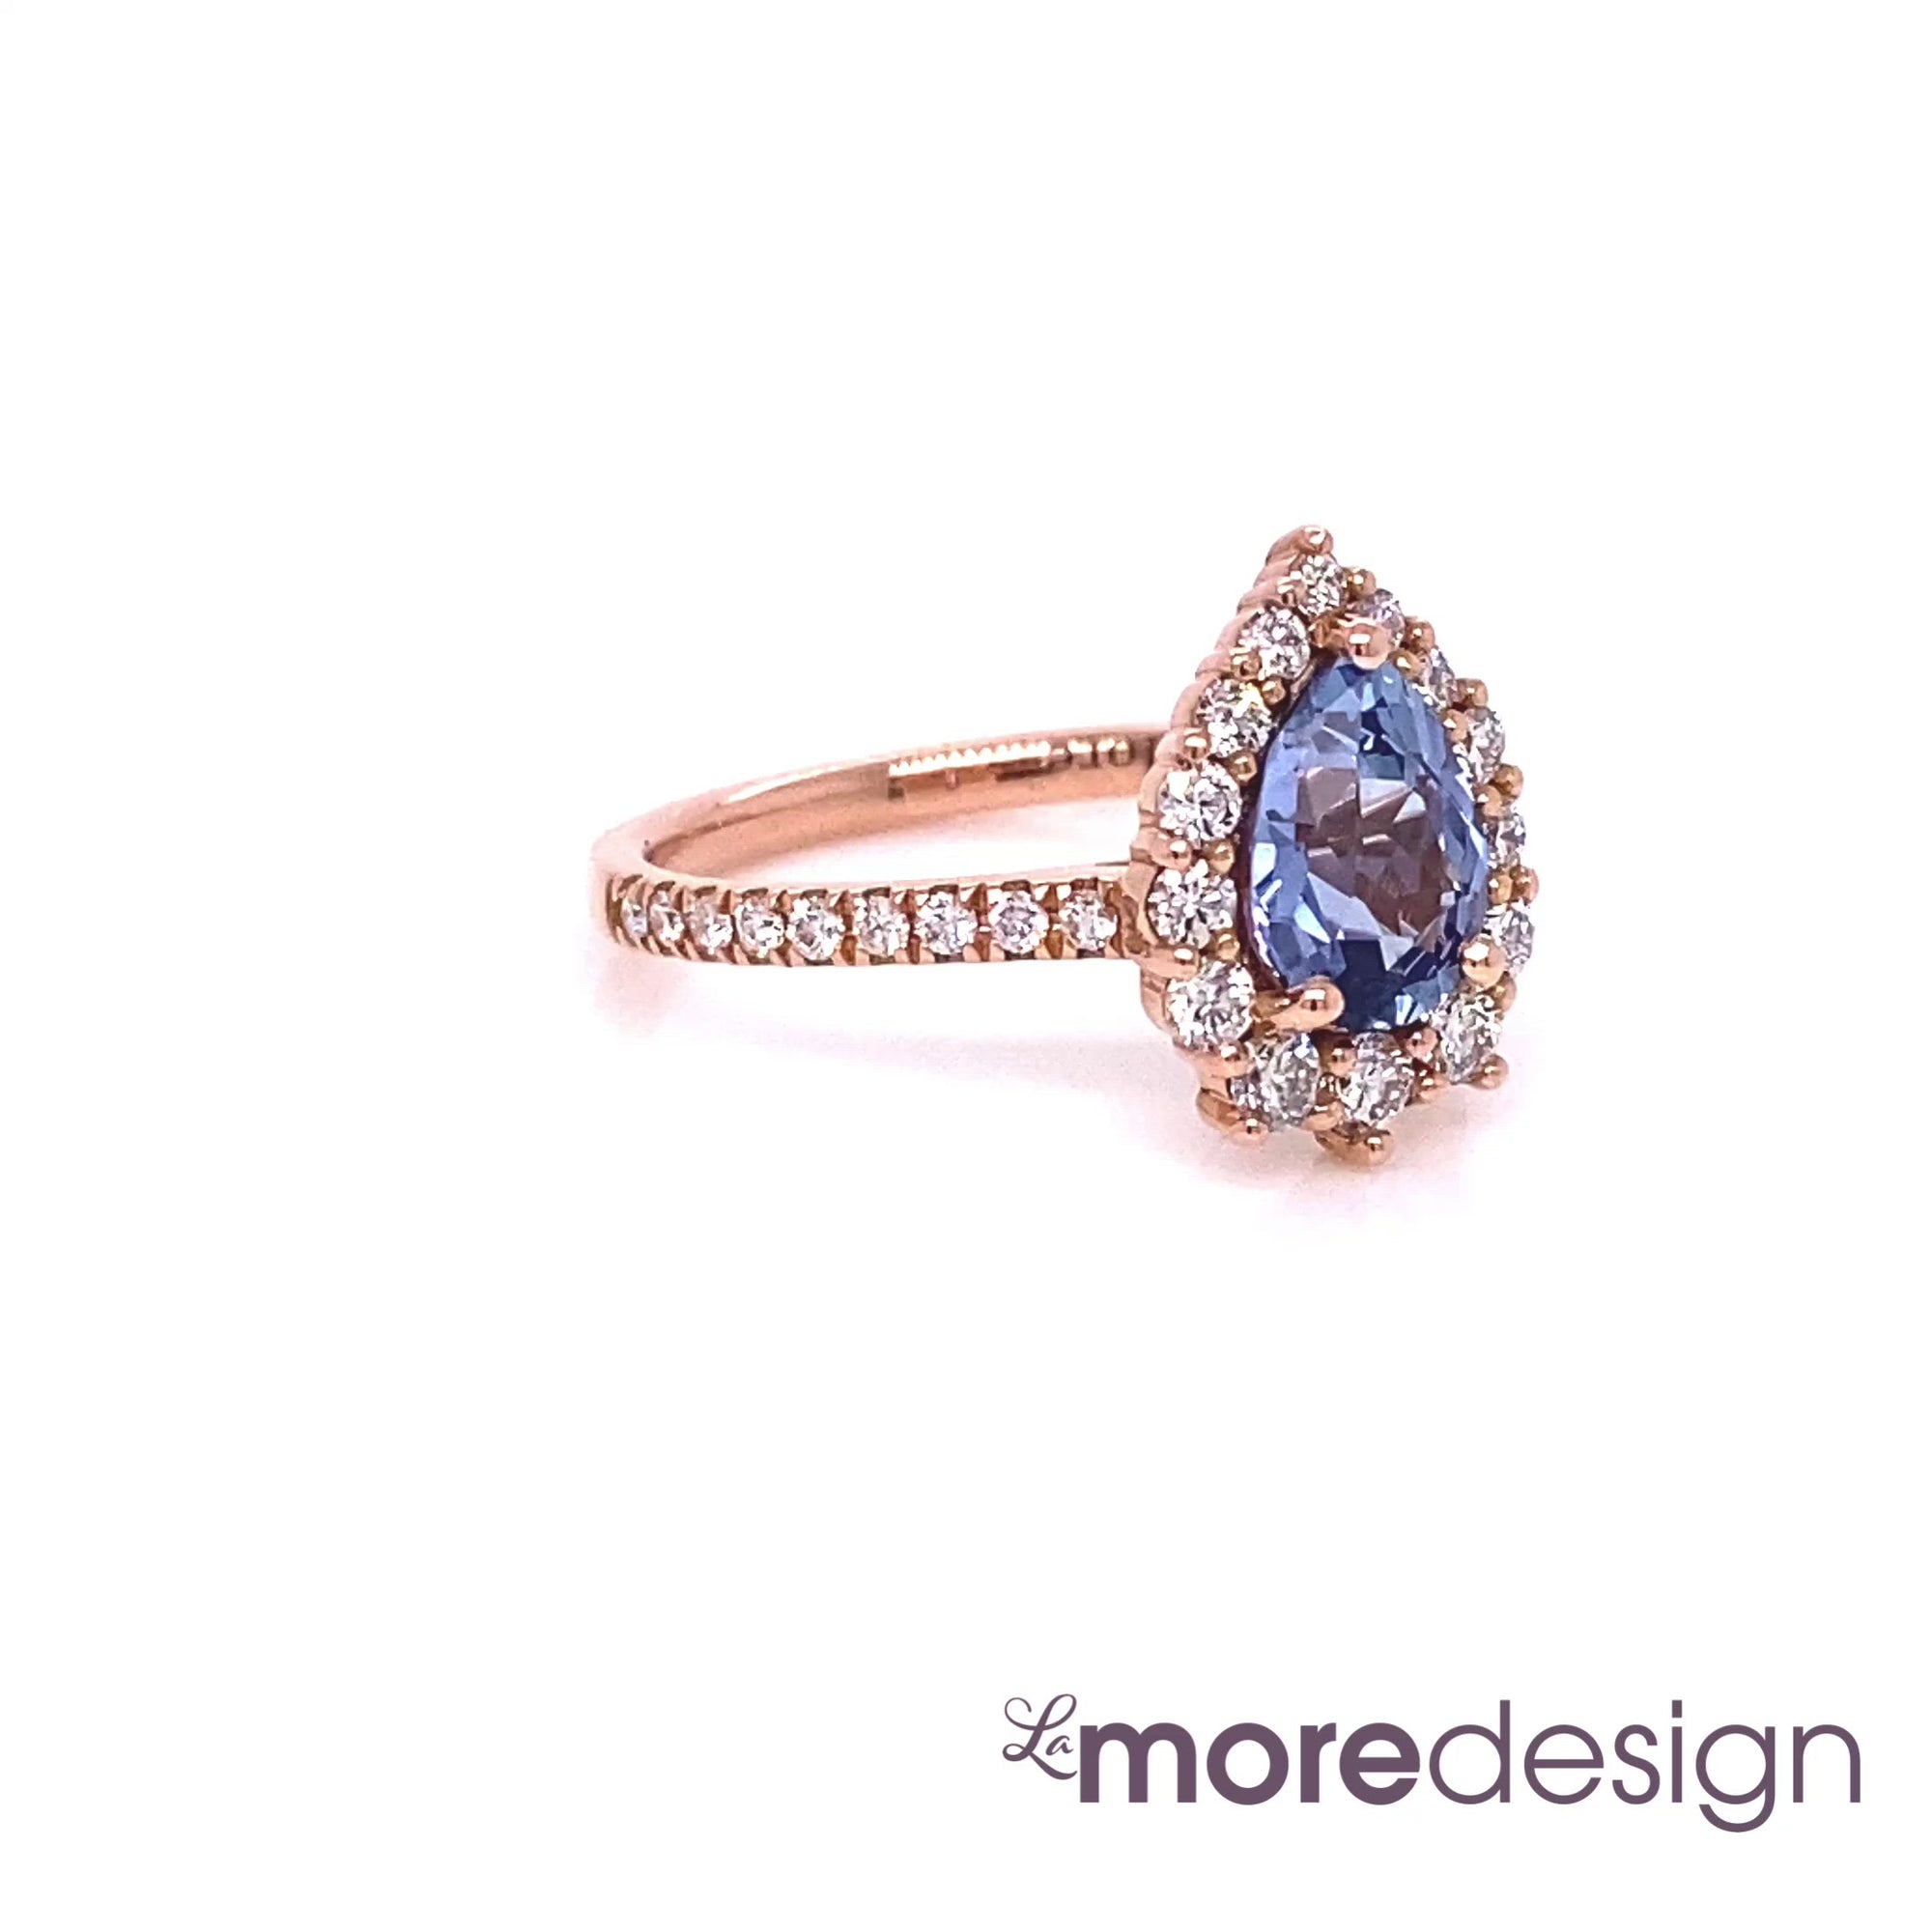 This timelessly elegant blue sapphire engagement ring is crafted in 14k rose gold Tiara Halo Diamond ring setting with a 1.26-carat pear cut natural sapphire center ~ total gemstone and diamond weight of the whole ring is 1.84 ct.tw.  This one-of-a-kind sapphire diamond ring is perfect for brides looking for diamond alternative engagement rings! All our wedding bands can pair beautifully with this gorgeous halo diamond sapphire ring!